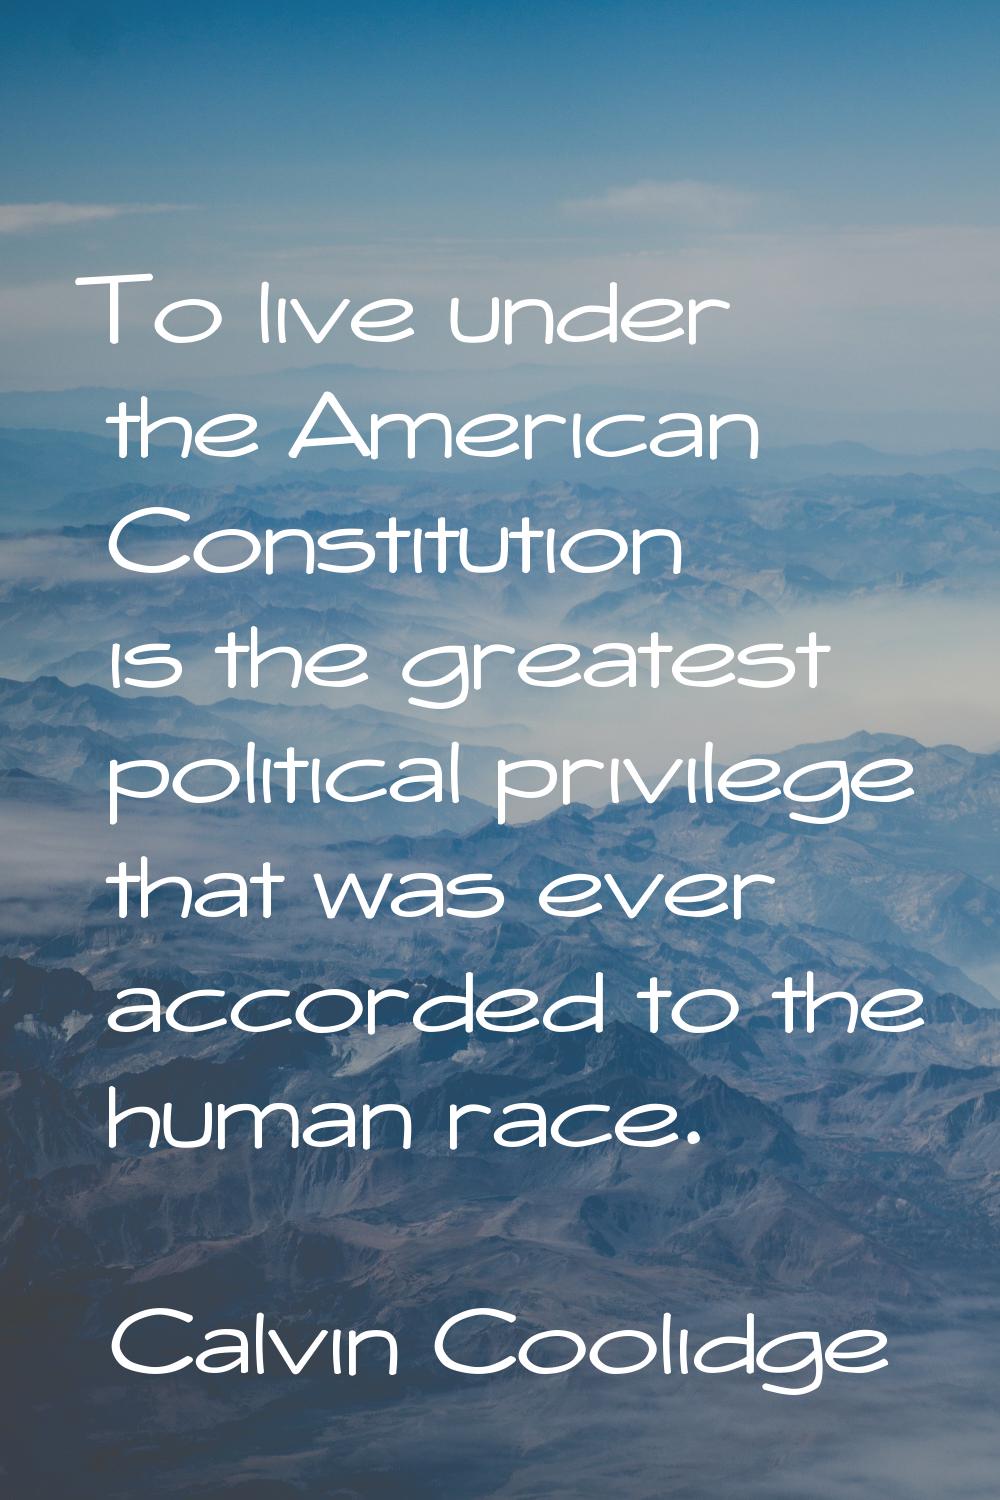 To live under the American Constitution is the greatest political privilege that was ever accorded 